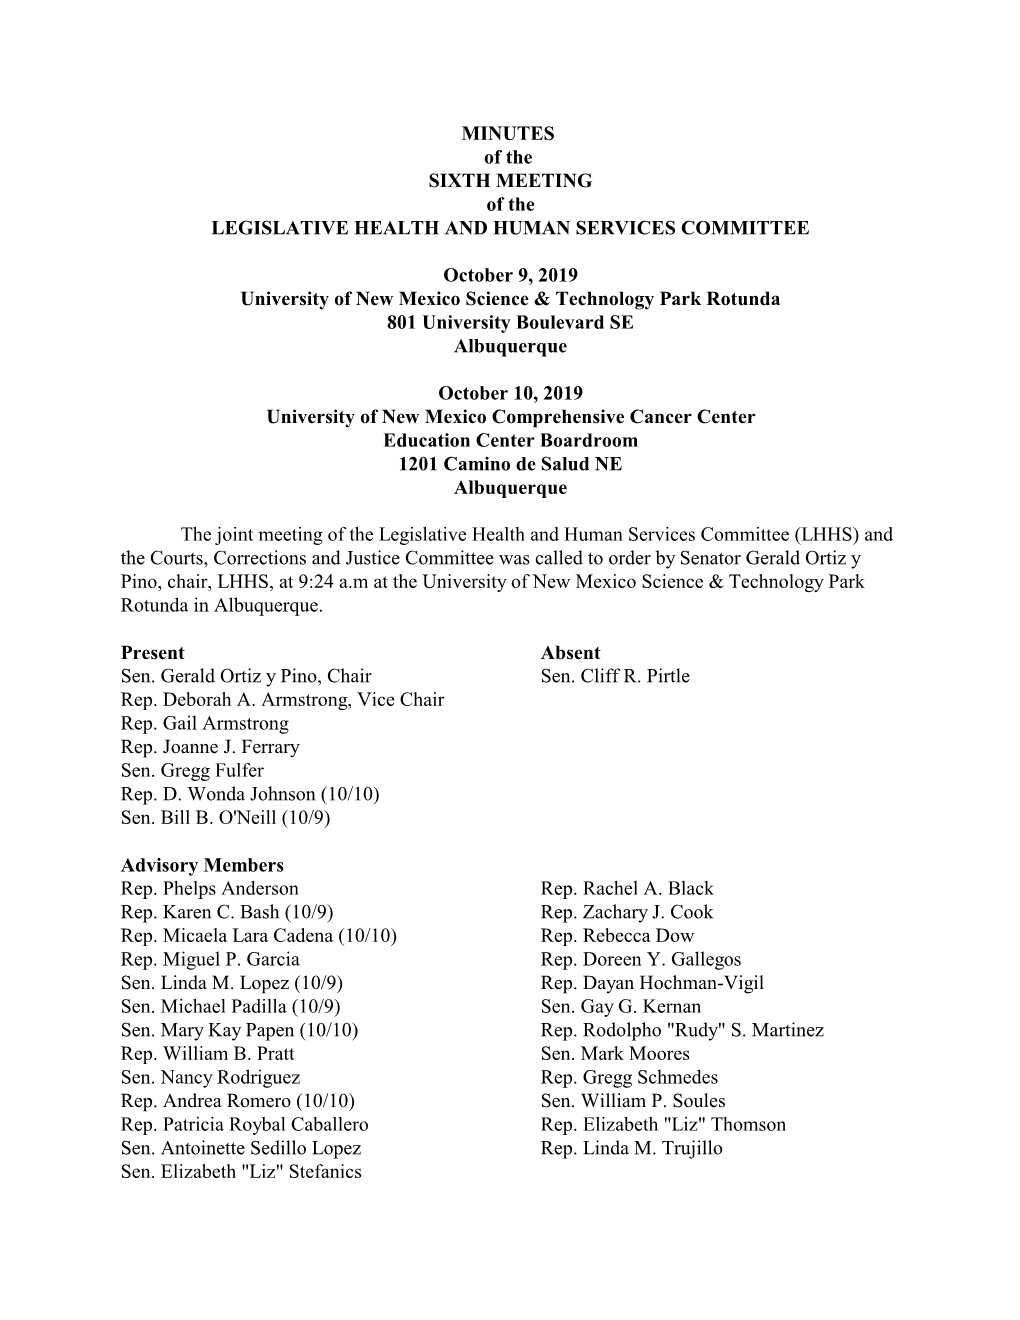 MINUTES of the SIXTH MEETING of the LEGISLATIVE HEALTH and HUMAN SERVICES COMMITTEE October 9, 2019 University of New Mexico